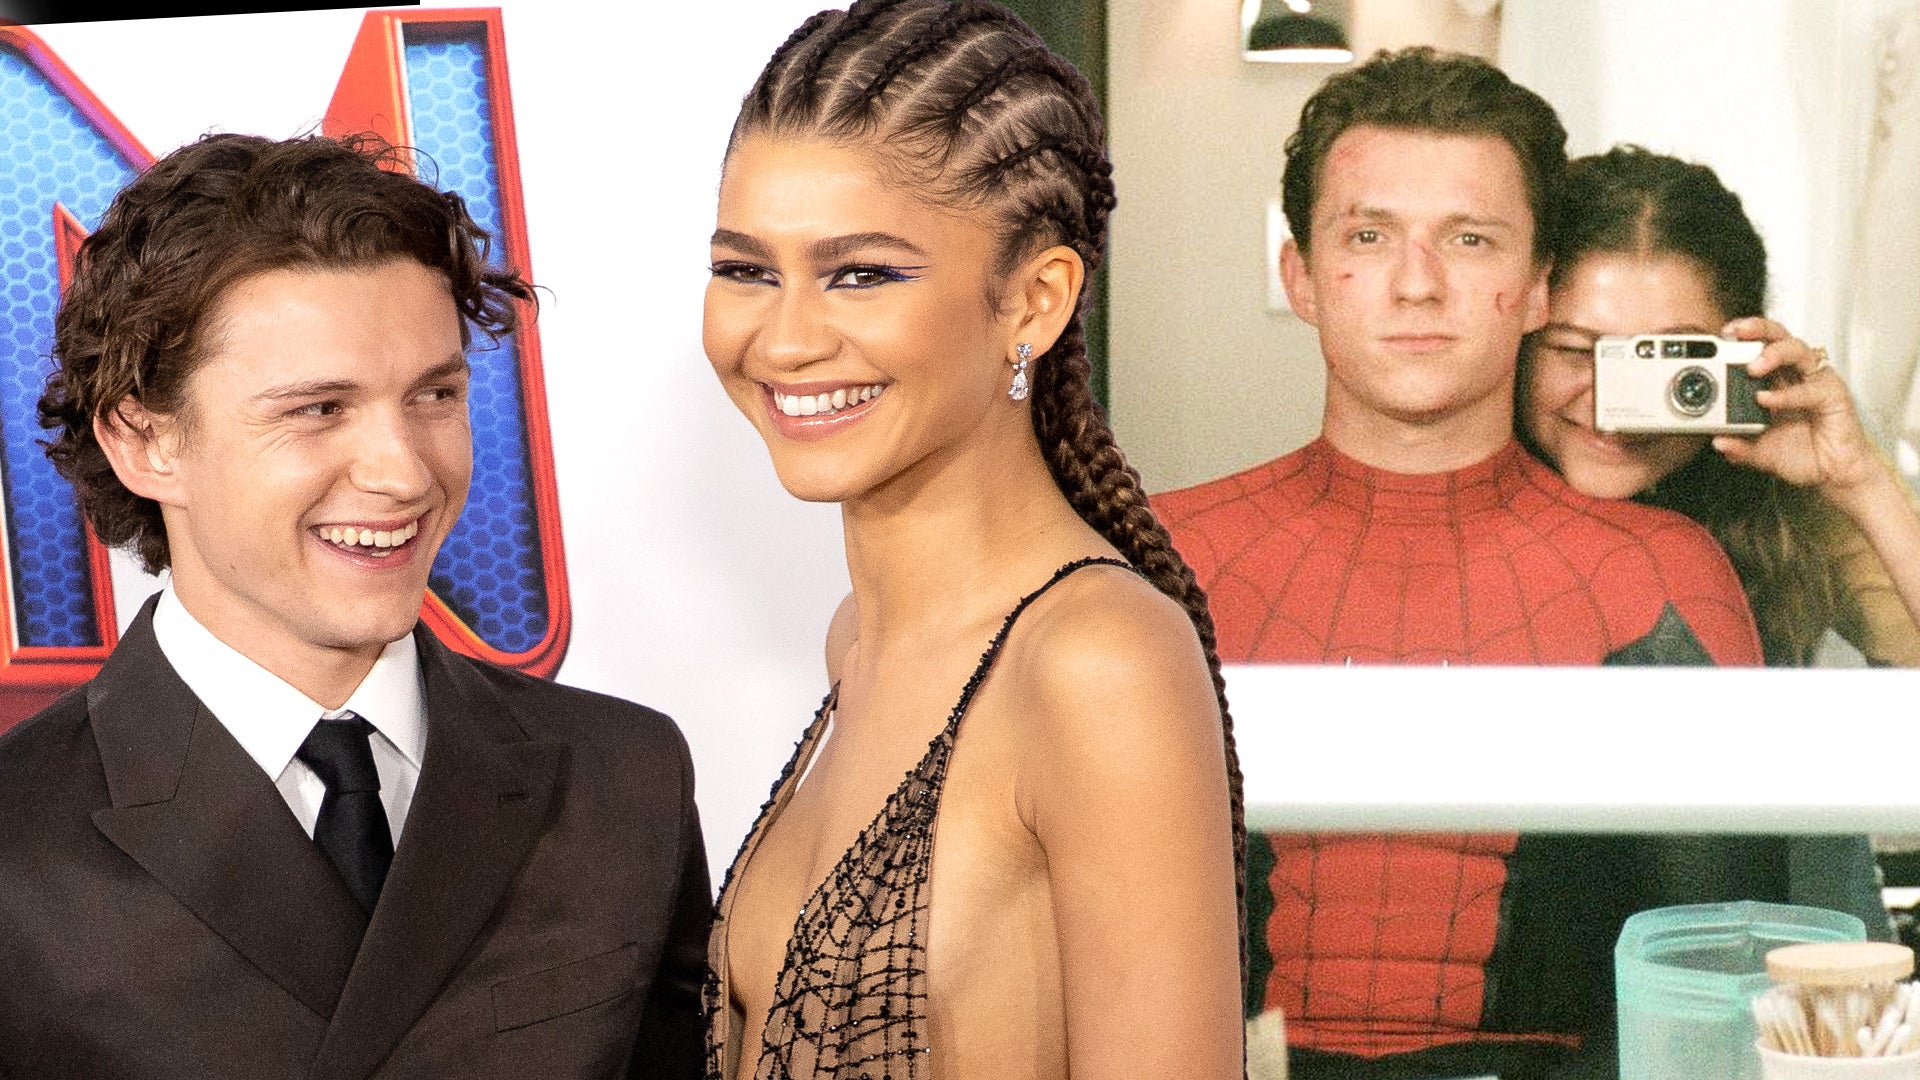 Zendaya shows off ring engraved with Tom Holland's initials